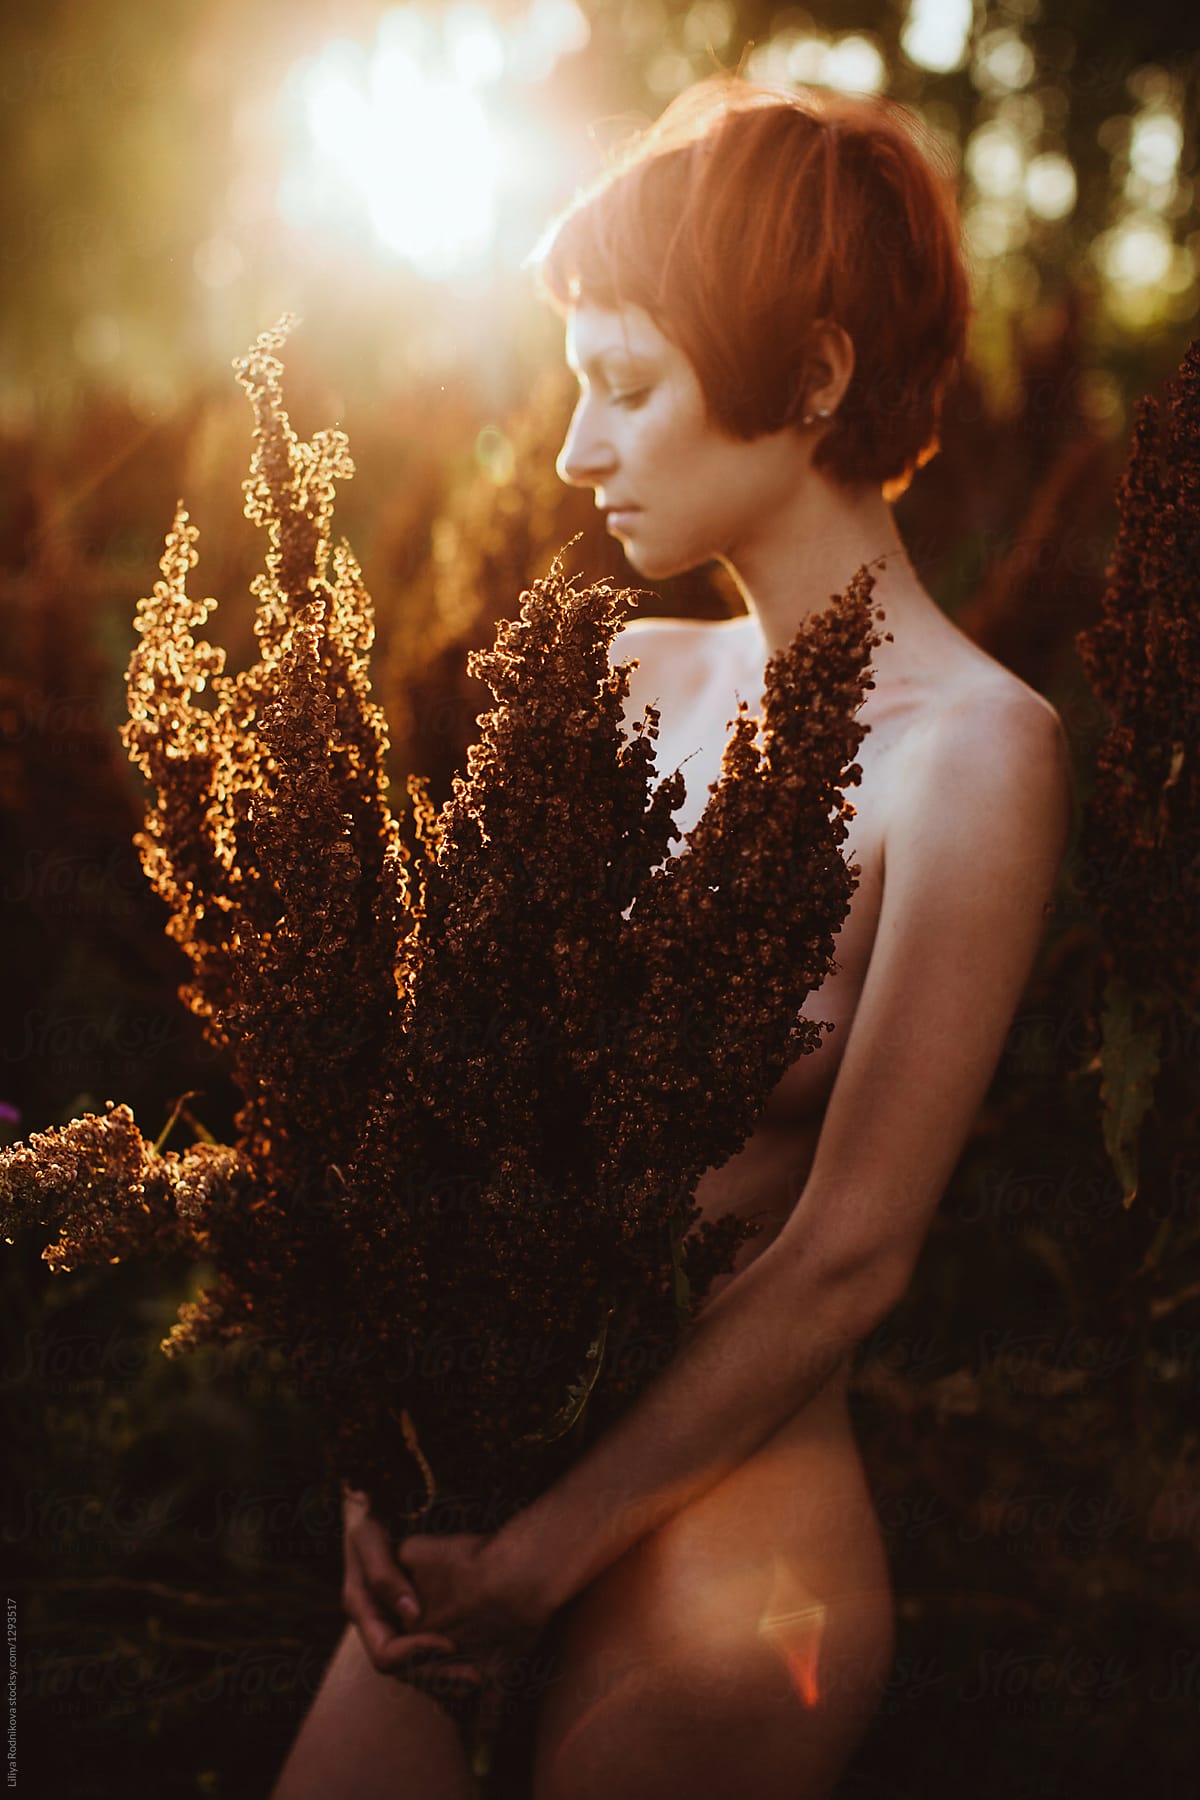 Naked young female in sunset light holding the bouquet